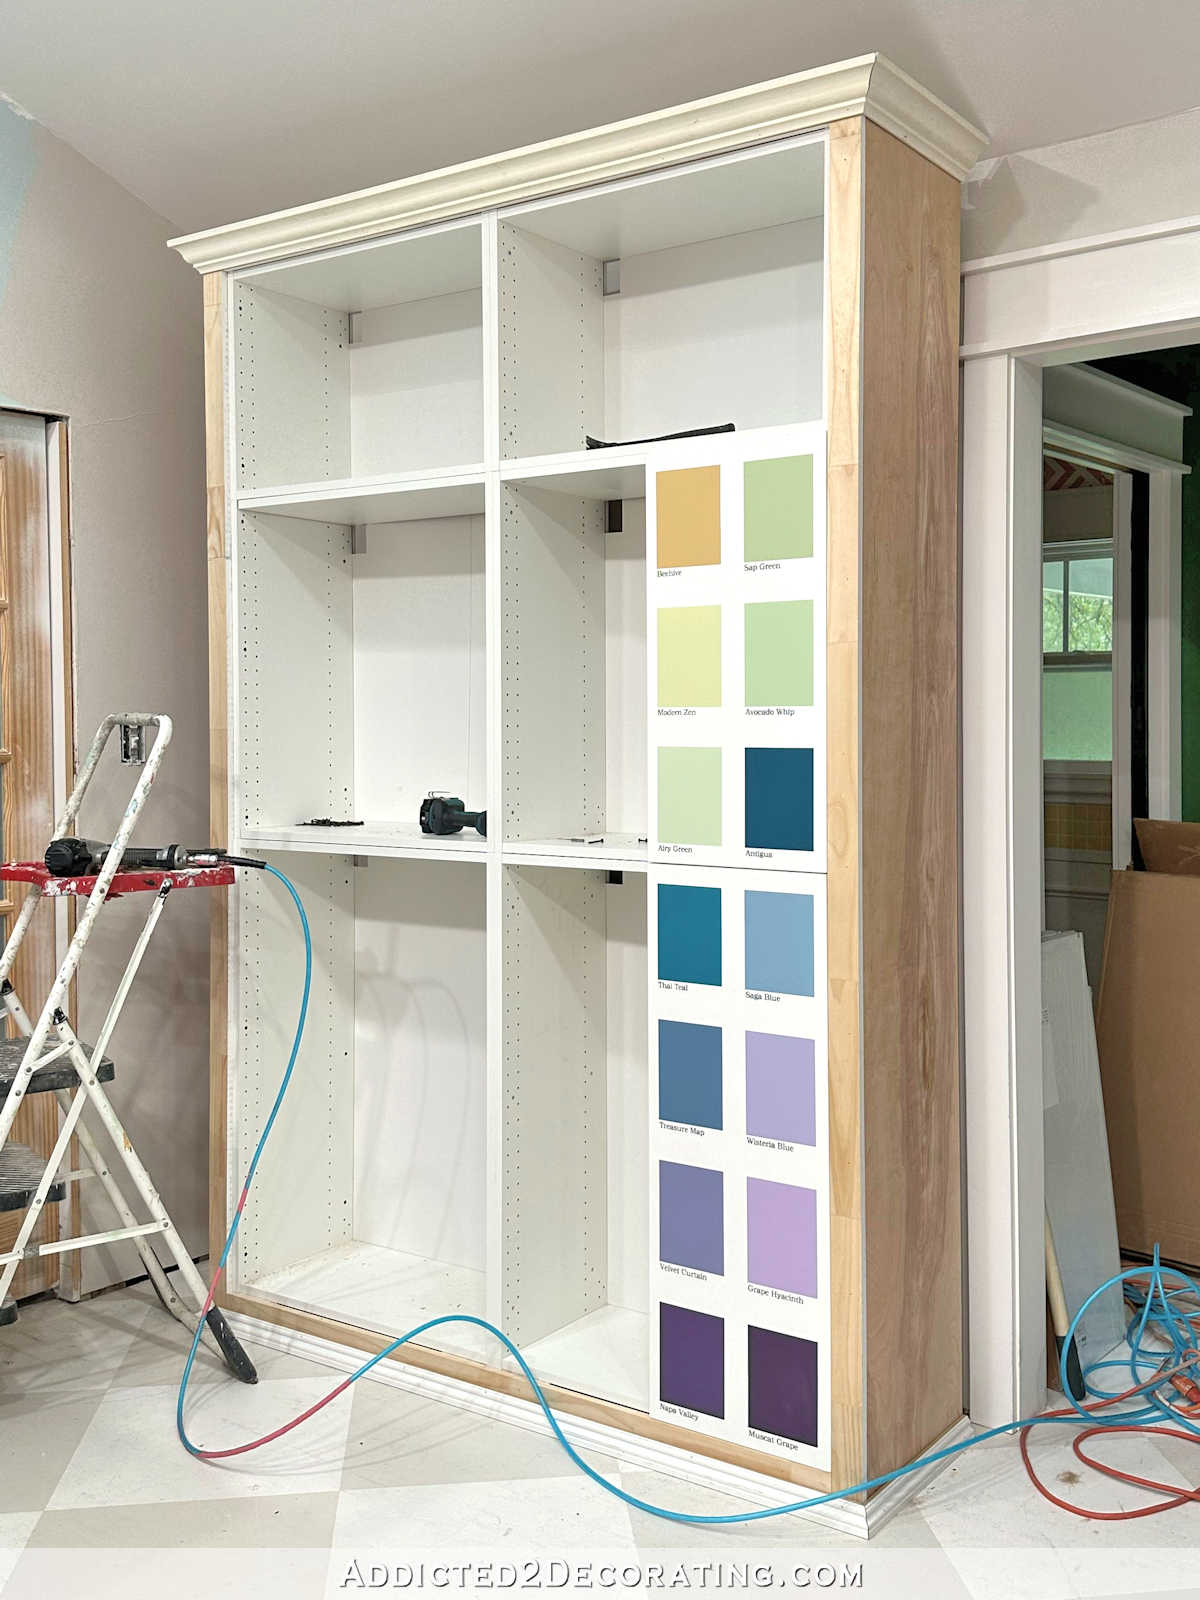 My 72-Color Paint Swatch Cabinets – Part 3 (Framing Out IKEA Cabinets To Make A Stand Alone Cabinet)